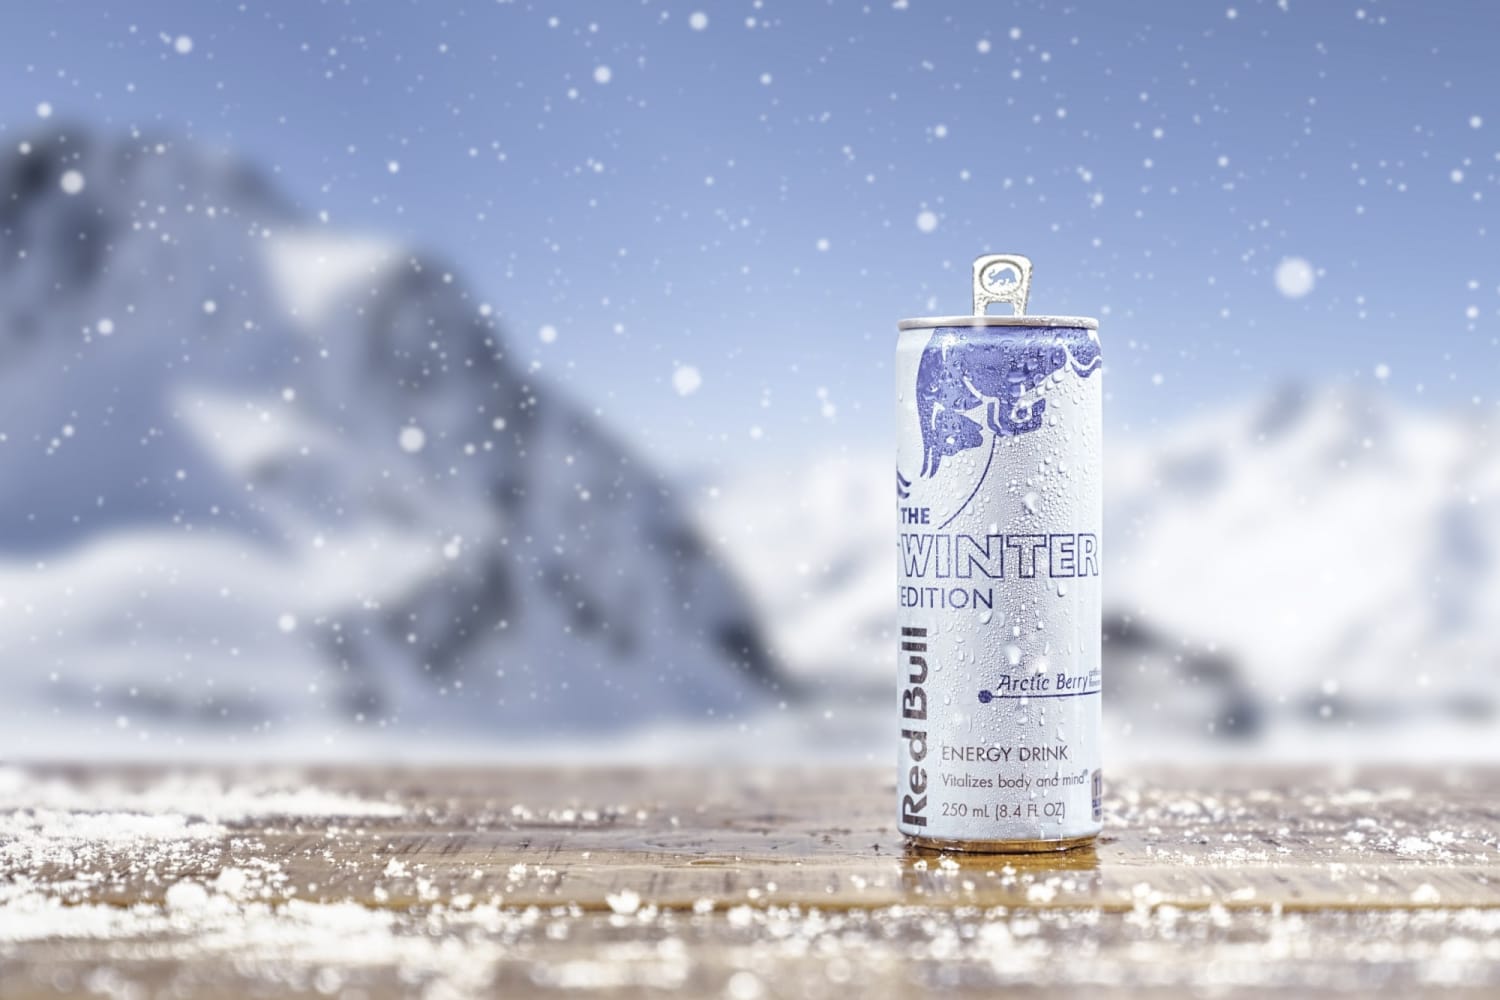 Red Bull Winter Edition Arctic Berry offers a sip of crisp refreshment